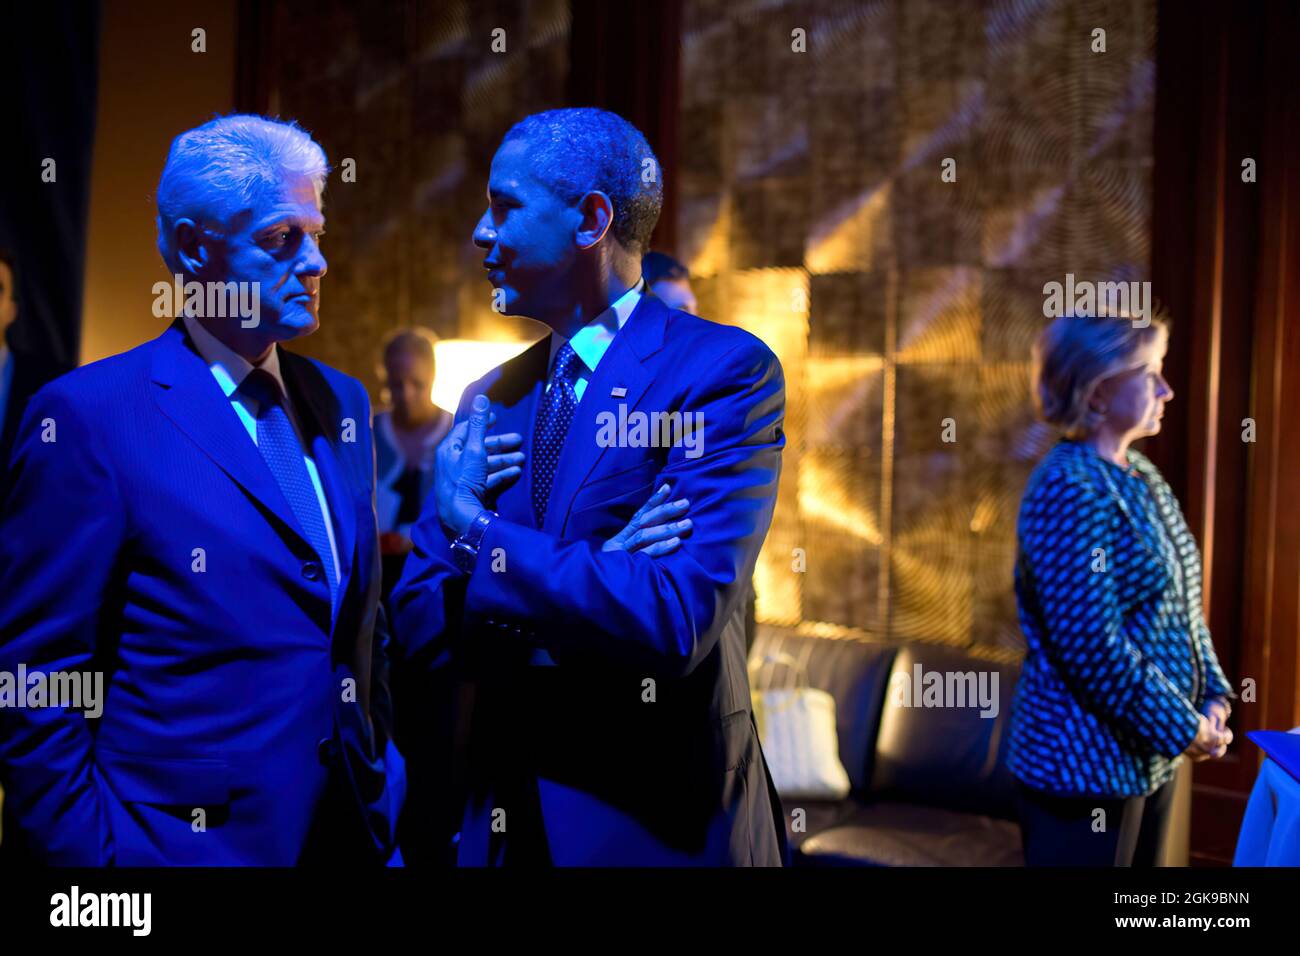 Sept. 24, 2013'The President and former President Bill Clinton are bathed in blue light as they talk backstage prior to participating in the Clinton Global Initiative Healthcare Forum in New York City. Former Secretary of State Hillary Rodham Clinton, right, waits to introduce them.' (Official White House Photo by Pete Souza)  This official White House photograph is being made available only for publication by news organizations and/or for personal use printing by the subject(s) of the photograph. The photograph may not be manipulated in any way and may not be used in commercial or political m Stock Photo